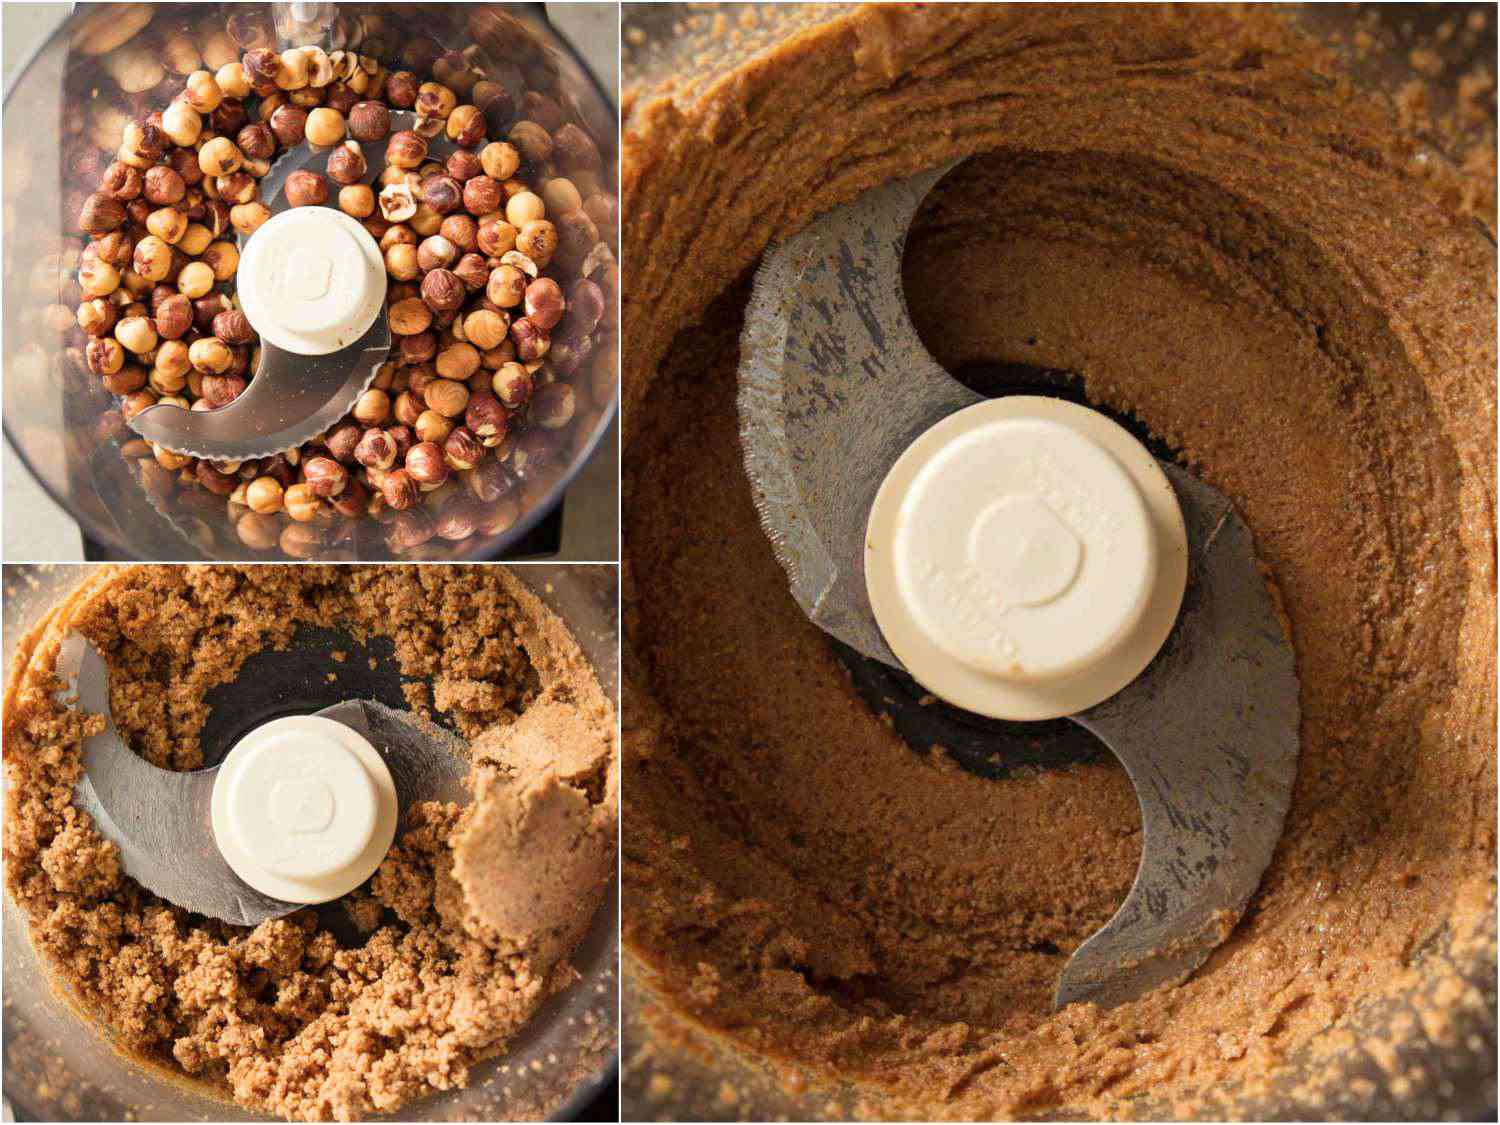 Collage of processing hazelnut butter: from a rough to smooth paste.